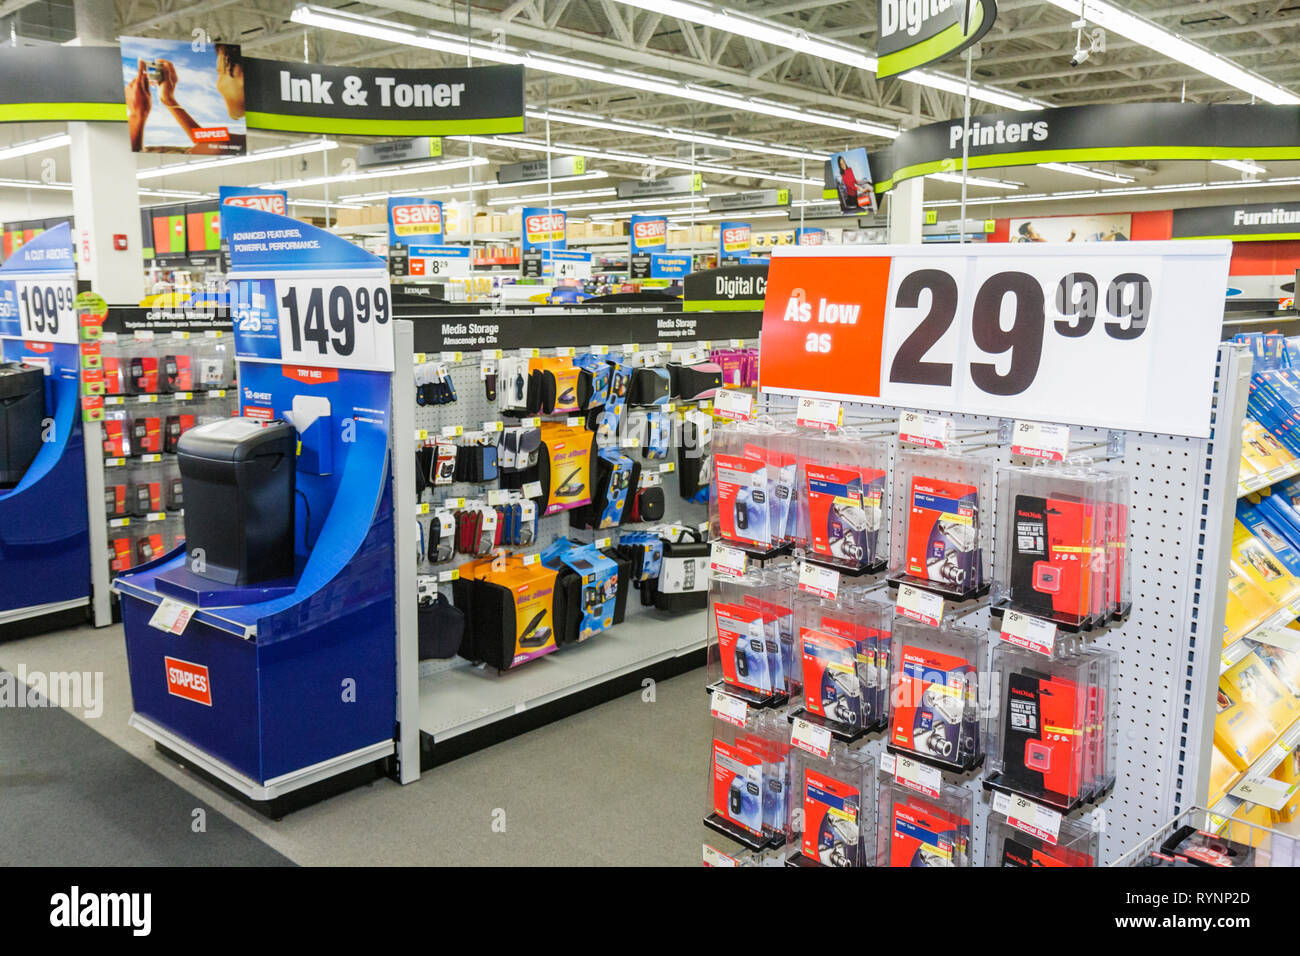 Miami Florida,Staples,office supply products store,retail,chain,merchandise,product products display sale,packaging,products,price,memory card,SanDisk Stock Photo